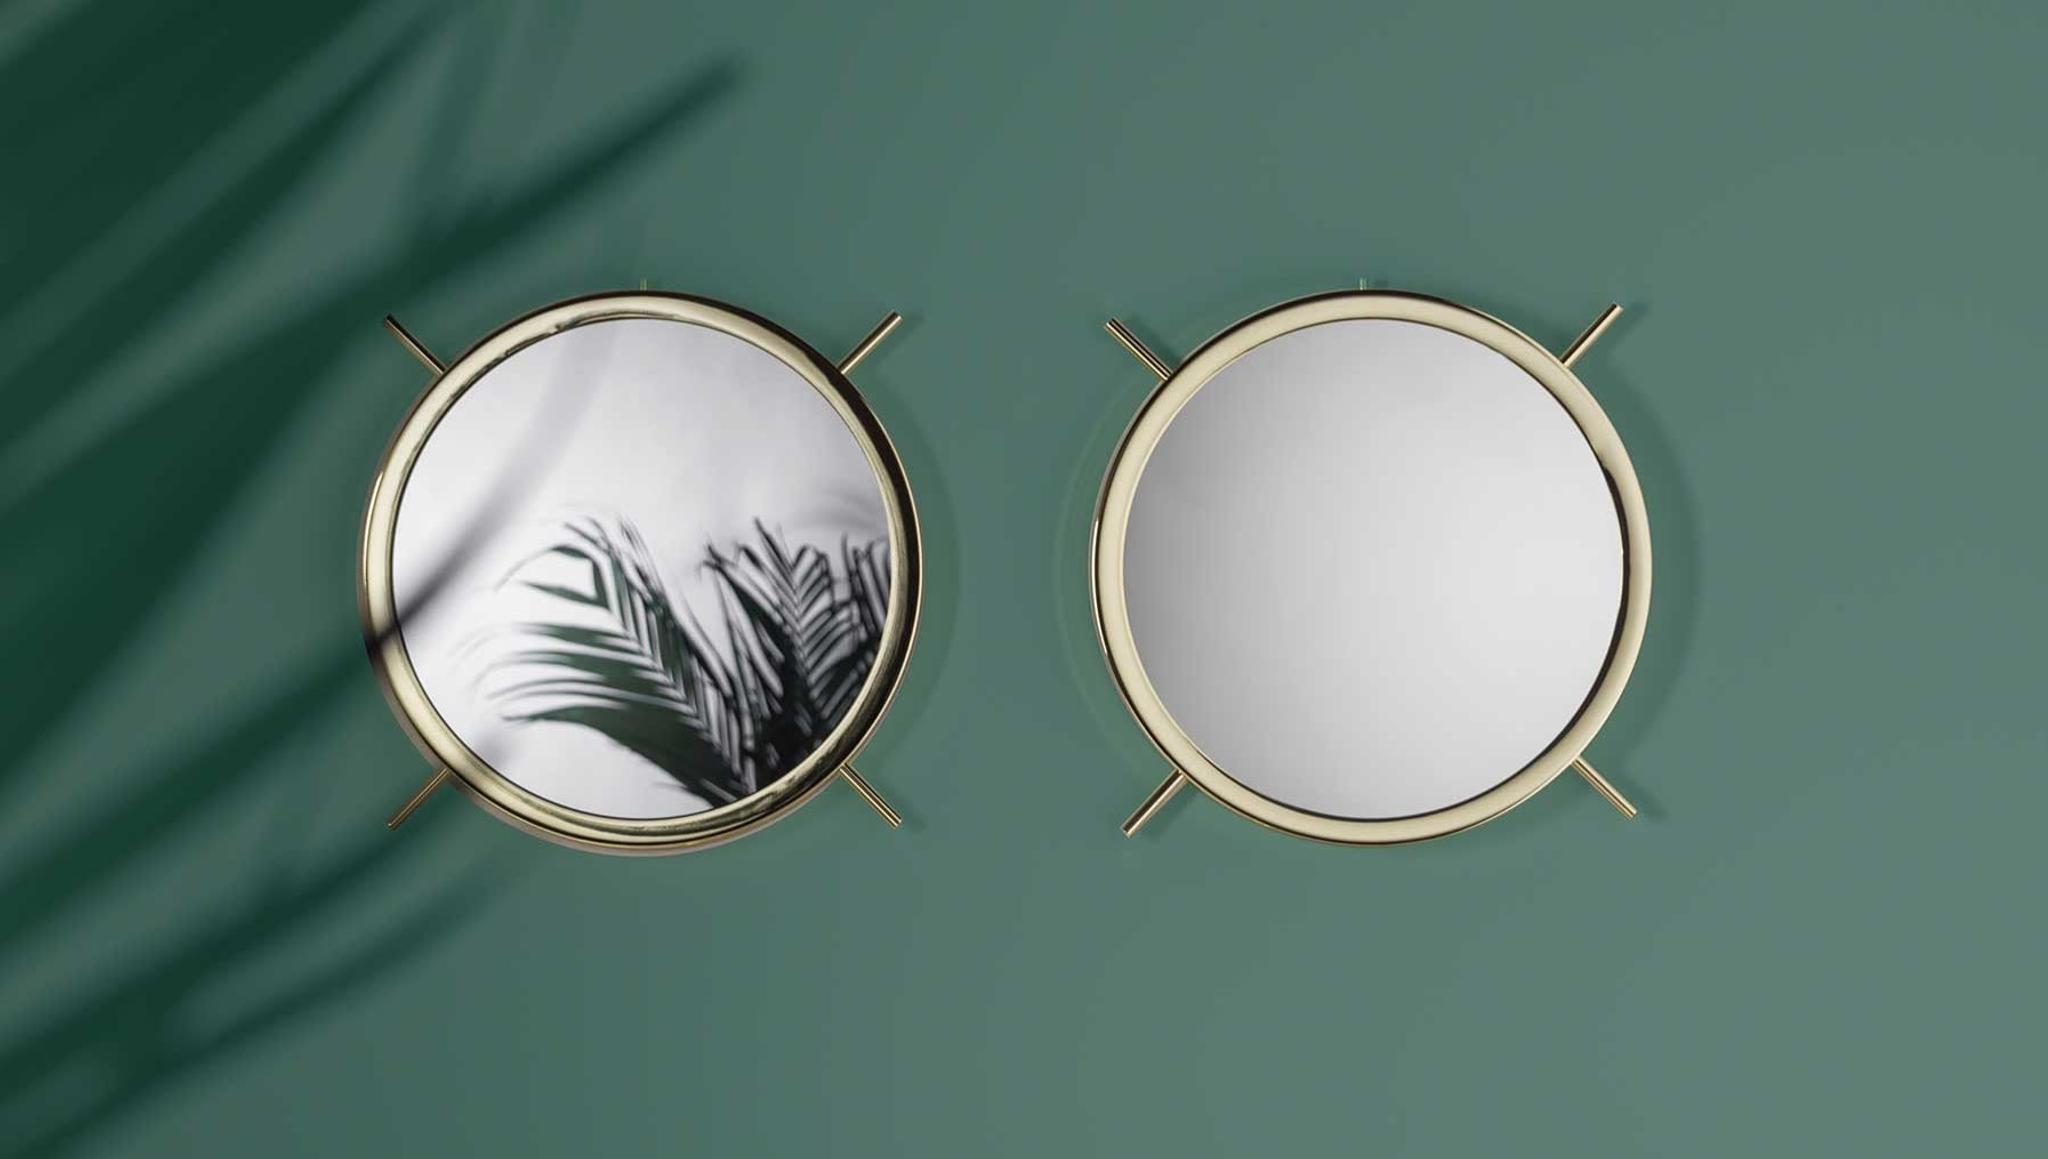 Contemporary Round Wall Mirrors